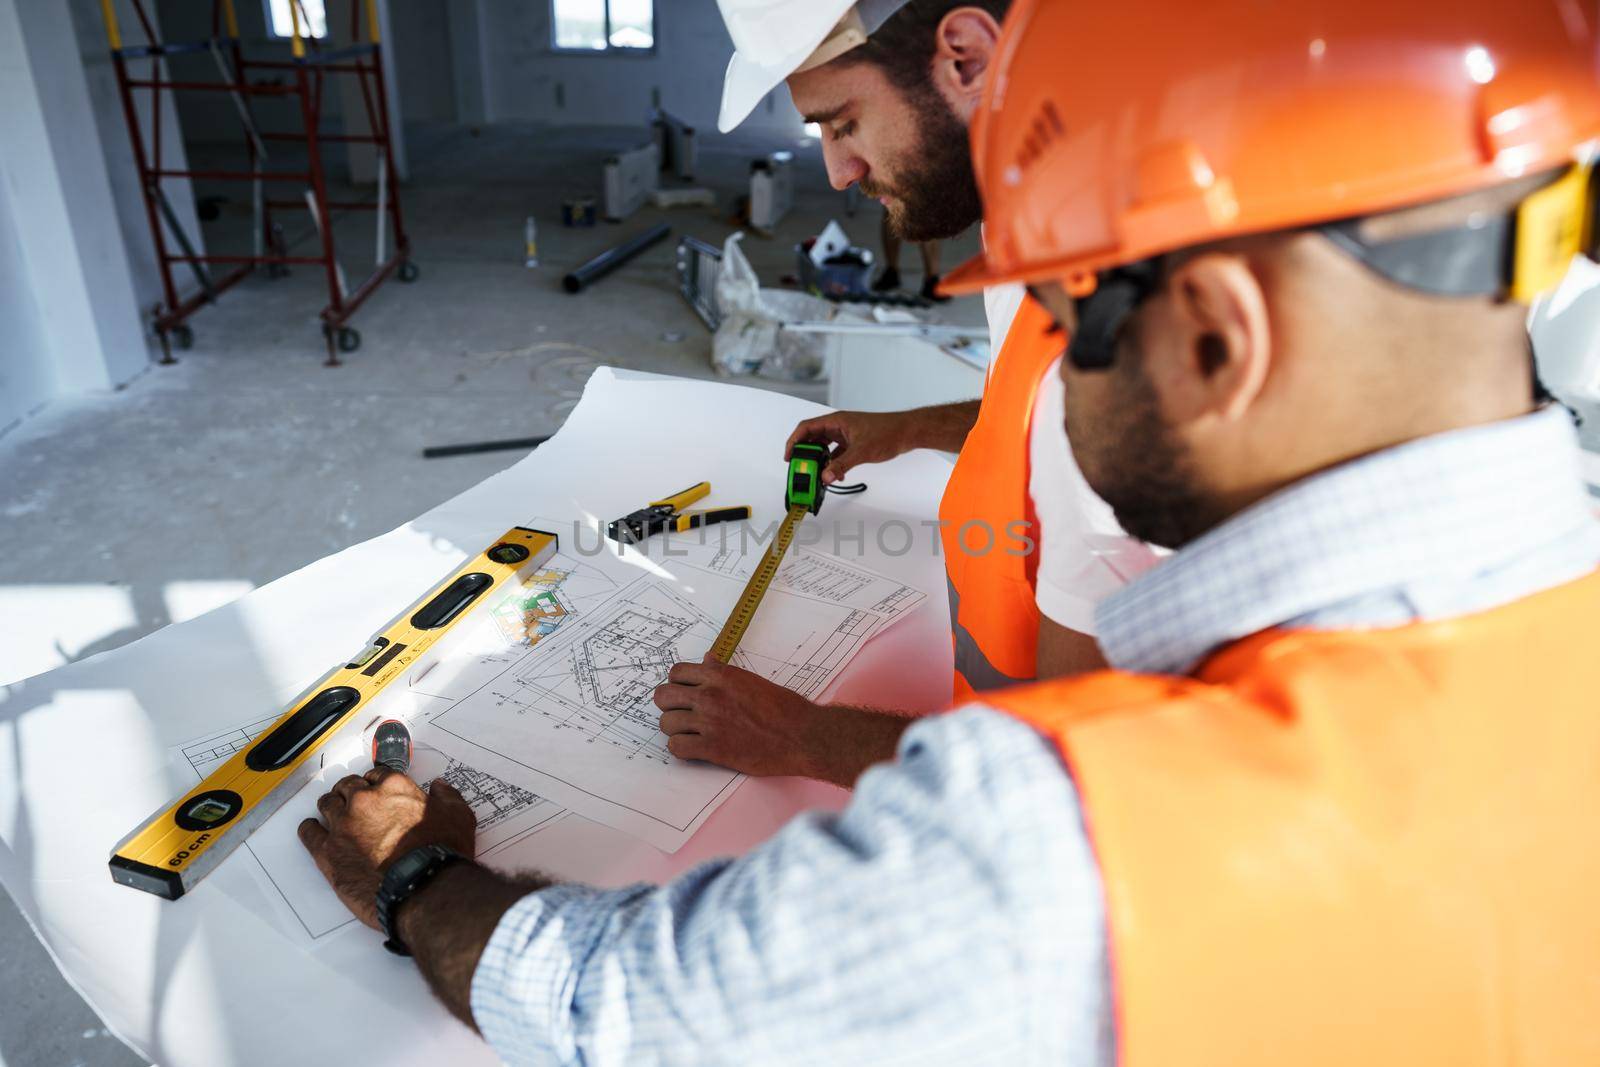 Two young engineers man looking at project plan on the table in construction site